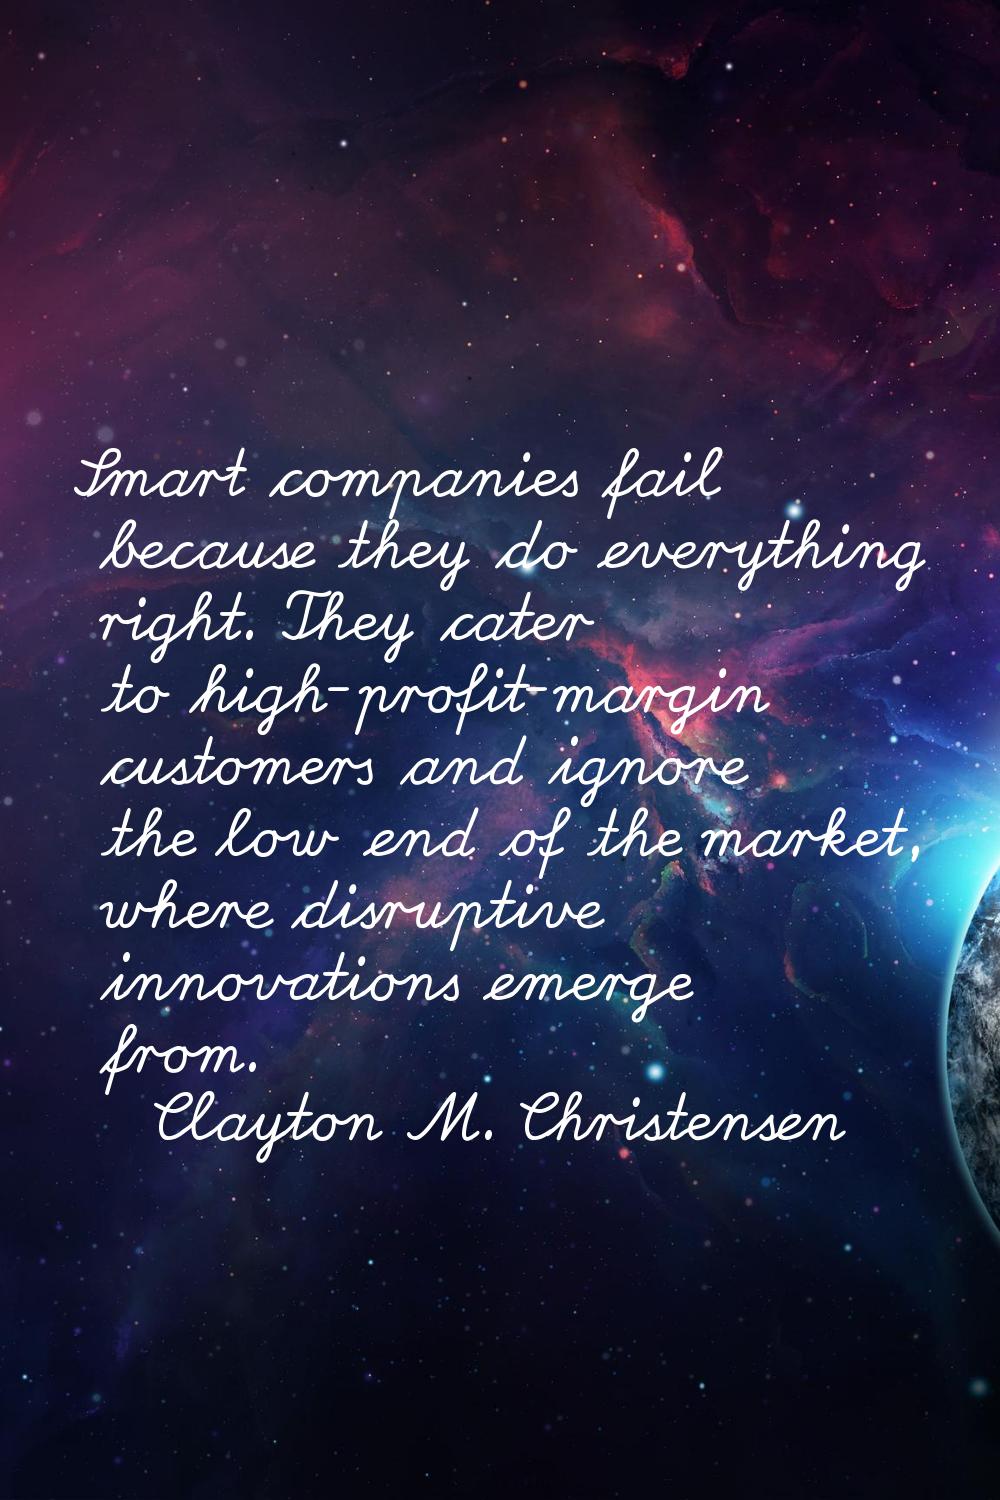 Smart companies fail because they do everything right. They cater to high-profit-margin customers a